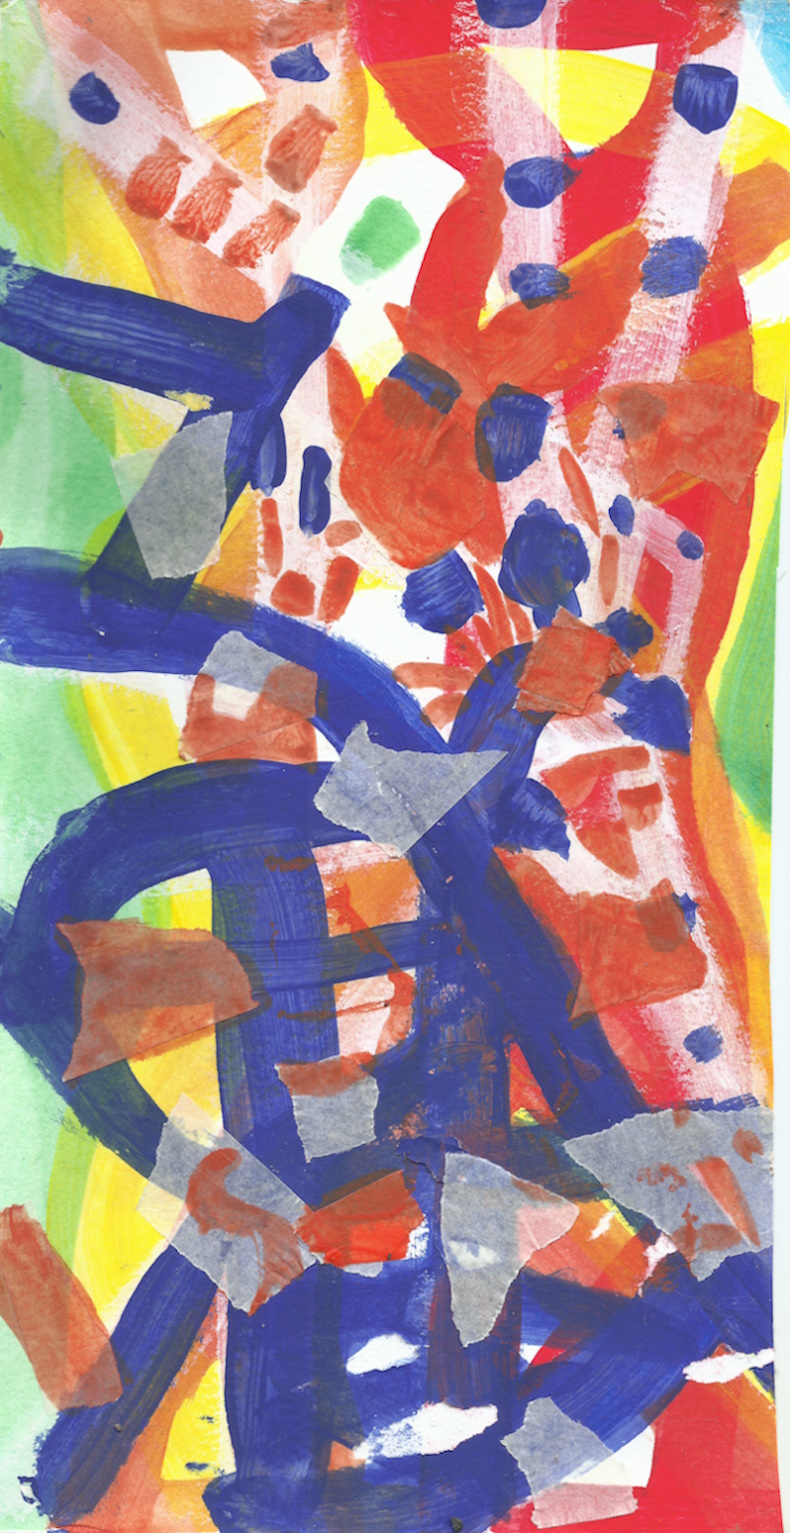 scan of a colourful abstract painting